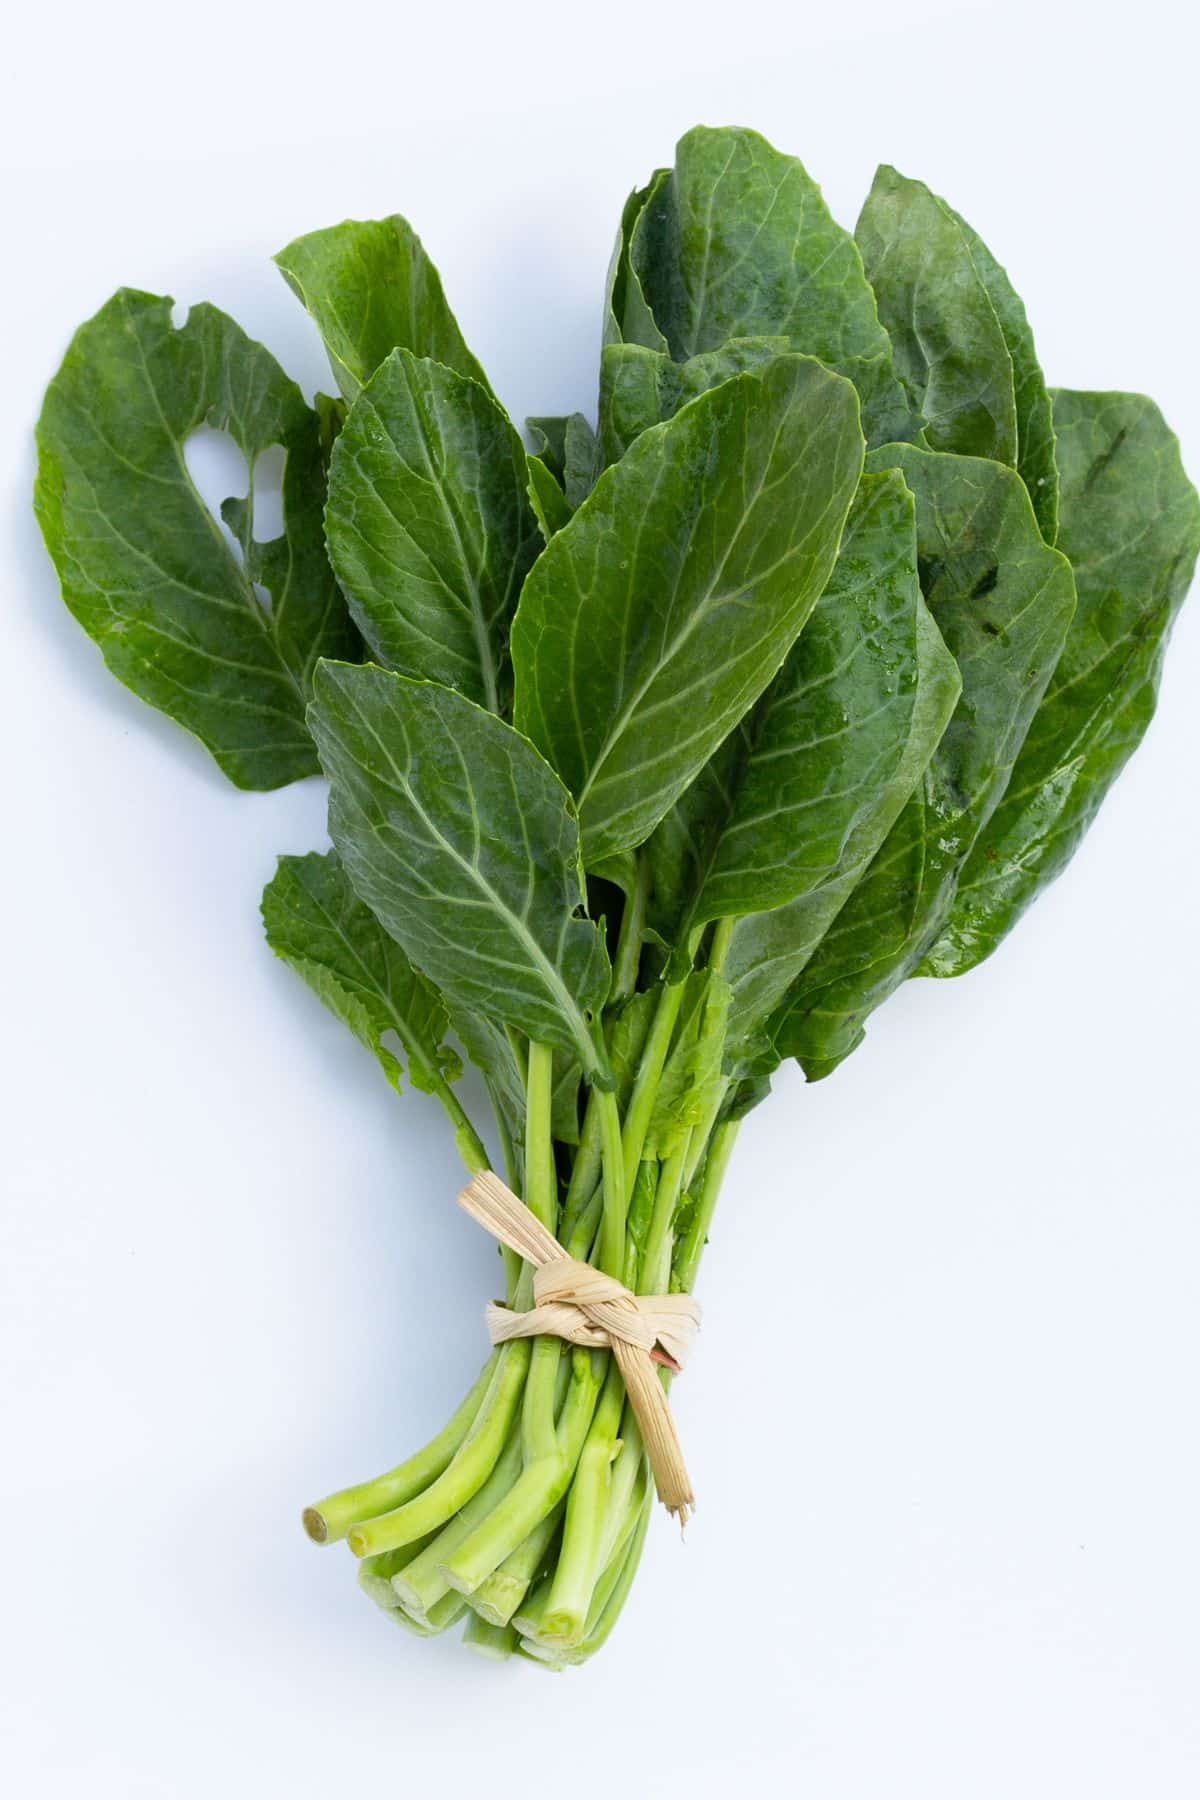 Tied bunch of collard greens on light background.